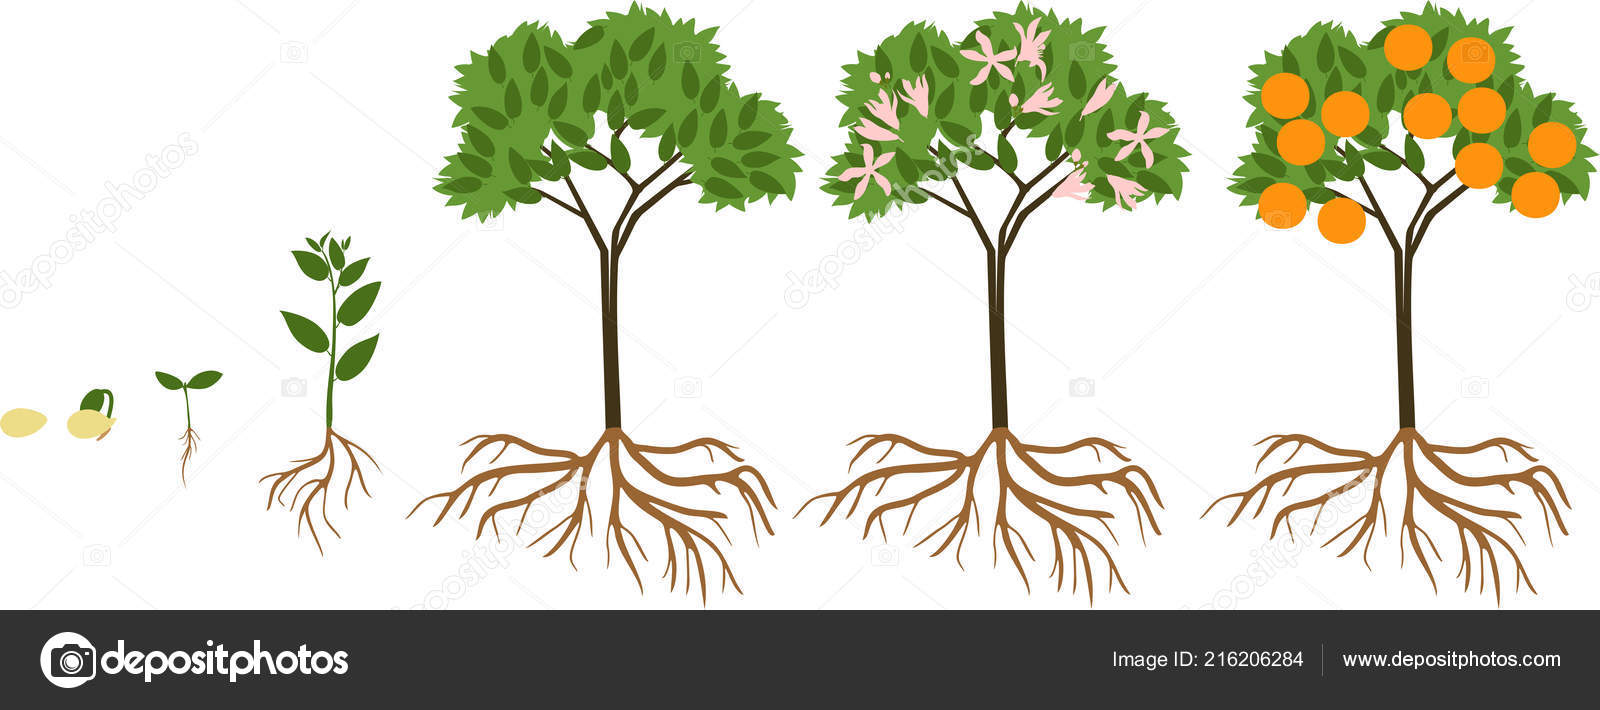 Life Cycle  Orange  Tree  Stages Growth Seed Sprout Adult 